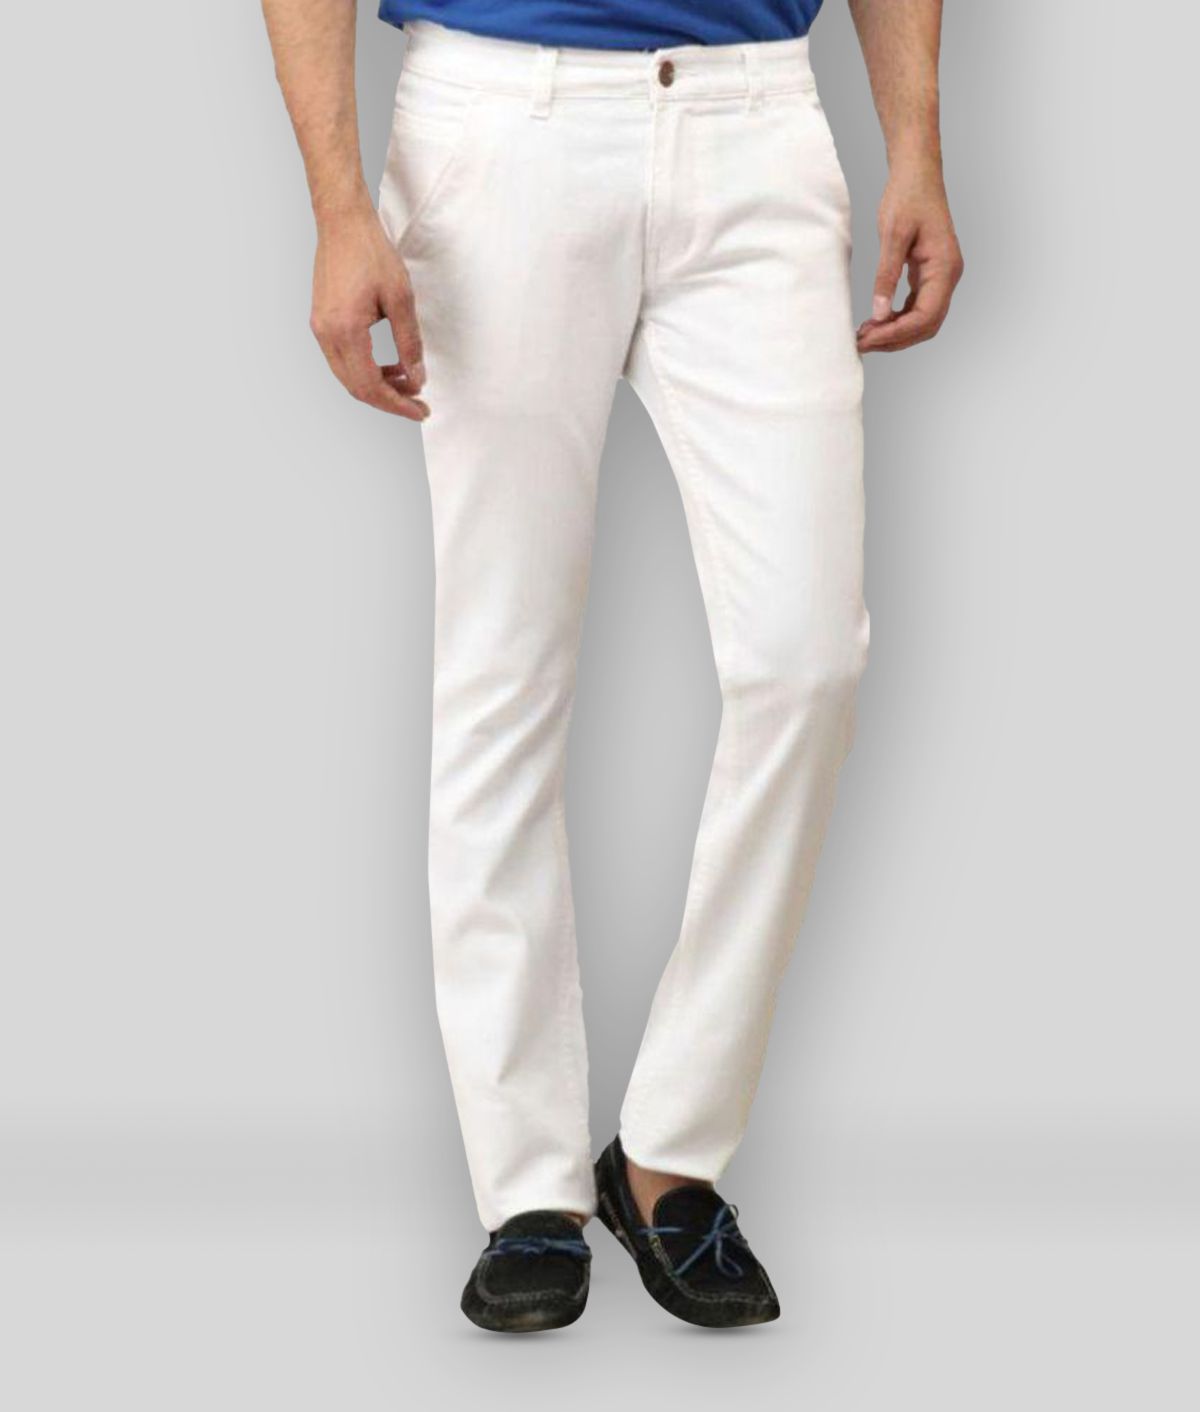 Urbano Fashion - White Cotton Blend Slim Fit Men's Jeans ( Pack of 1 )